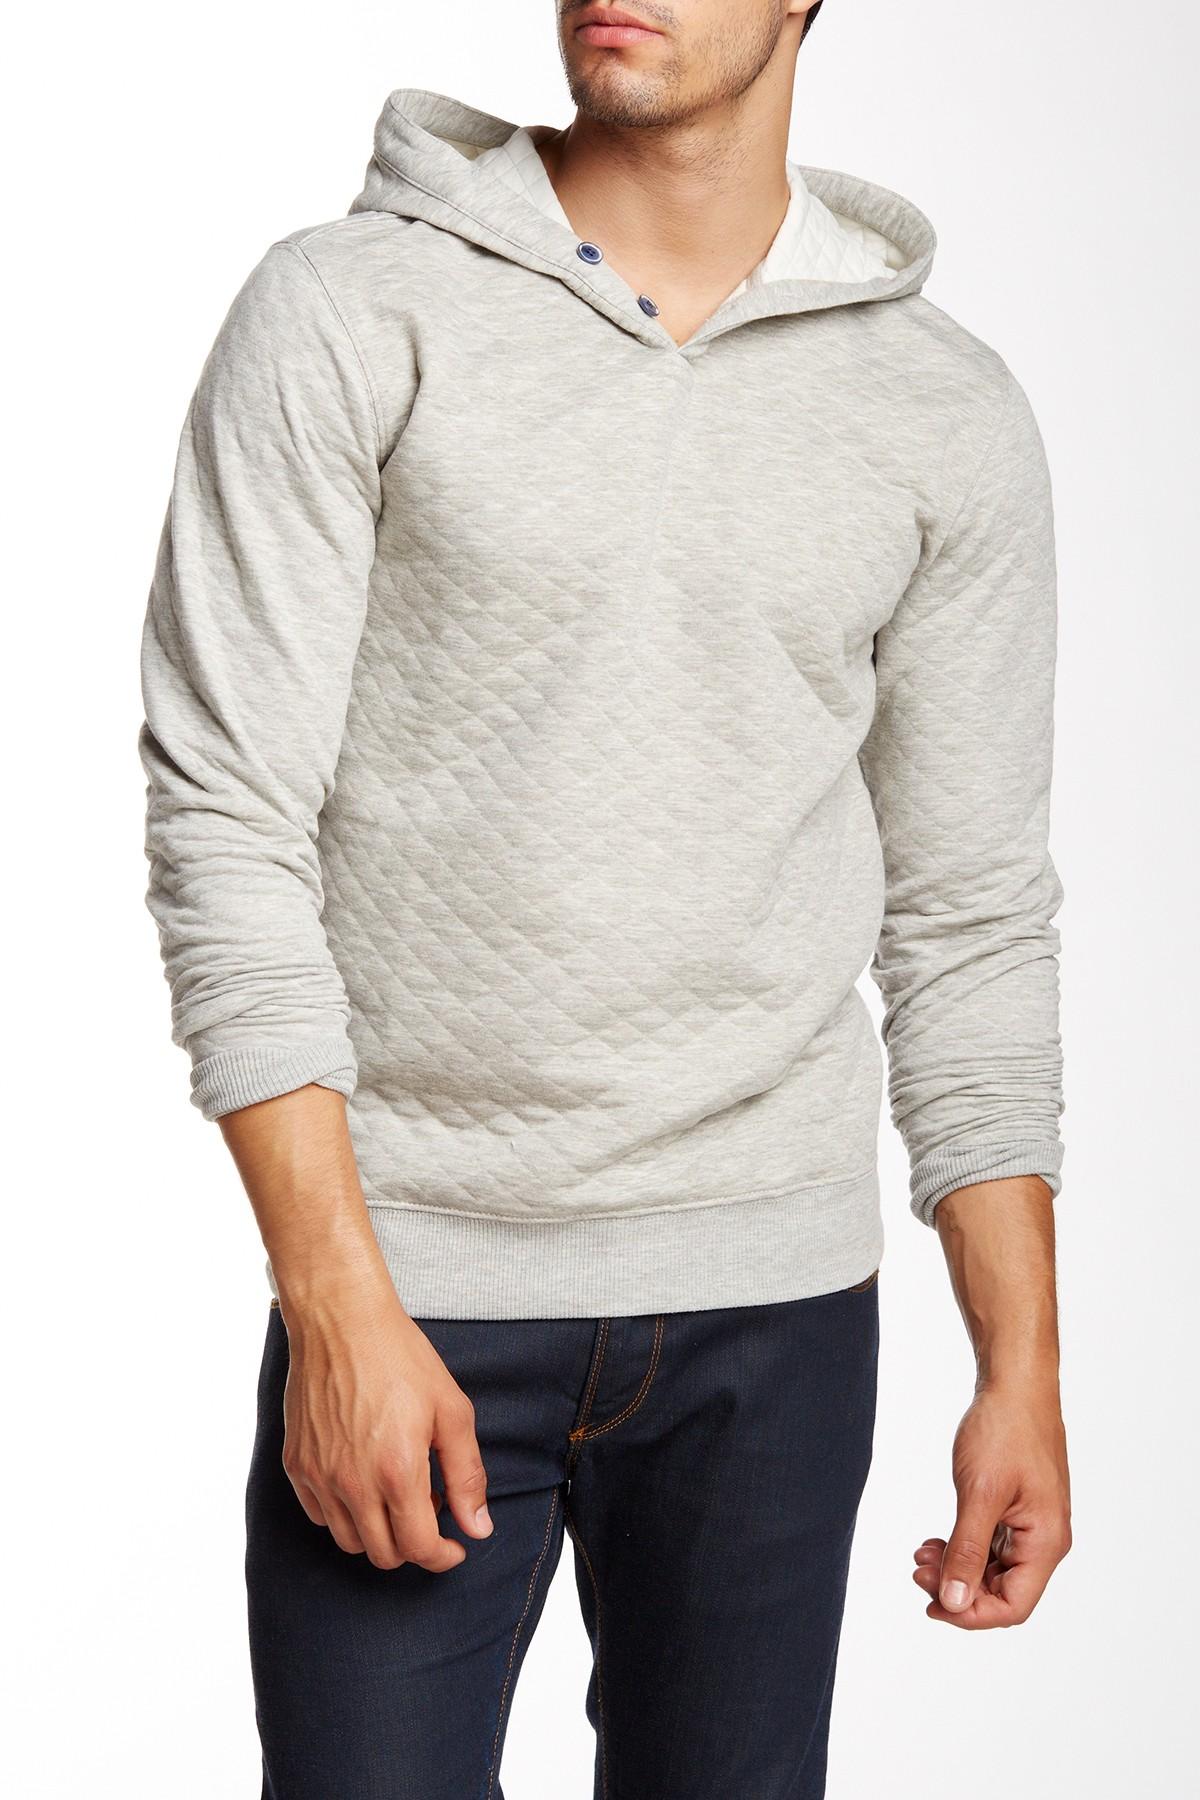 Slate & Stone Cotton Slater Hoodie in Grey (Gray) for Men - Lyst